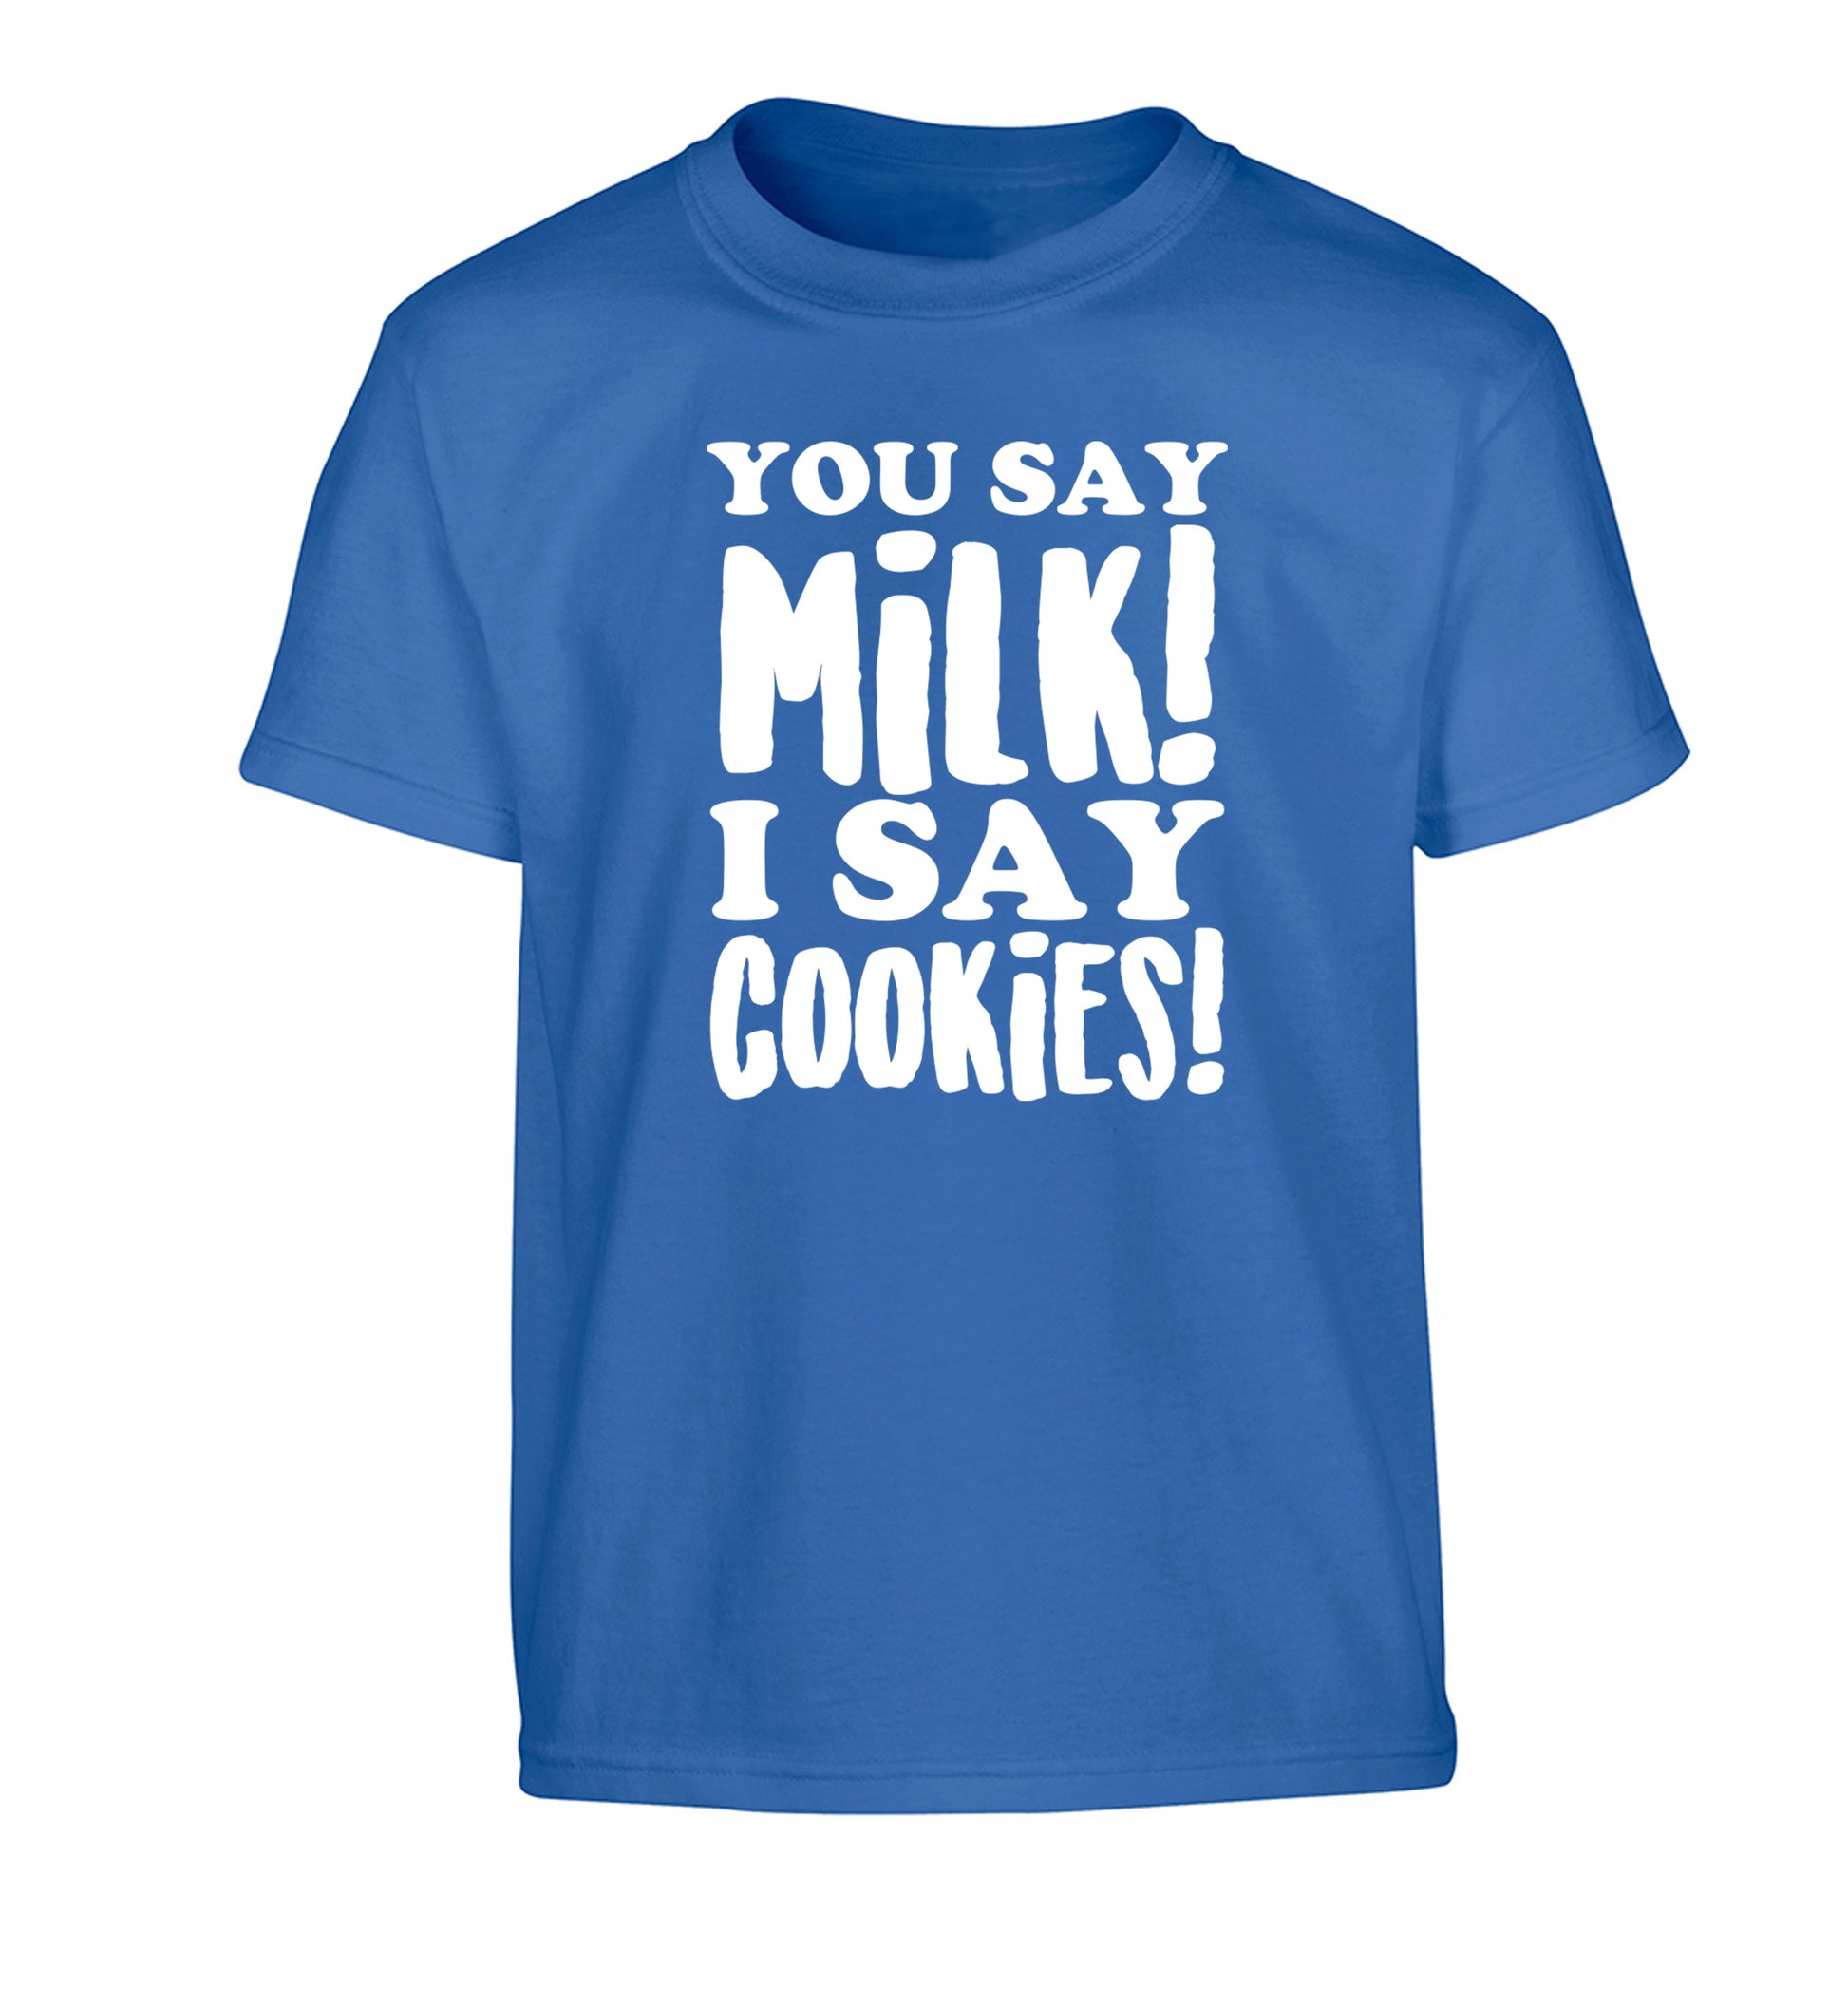 You say milk I say cookies! Children's blue Tshirt 12-14 Years